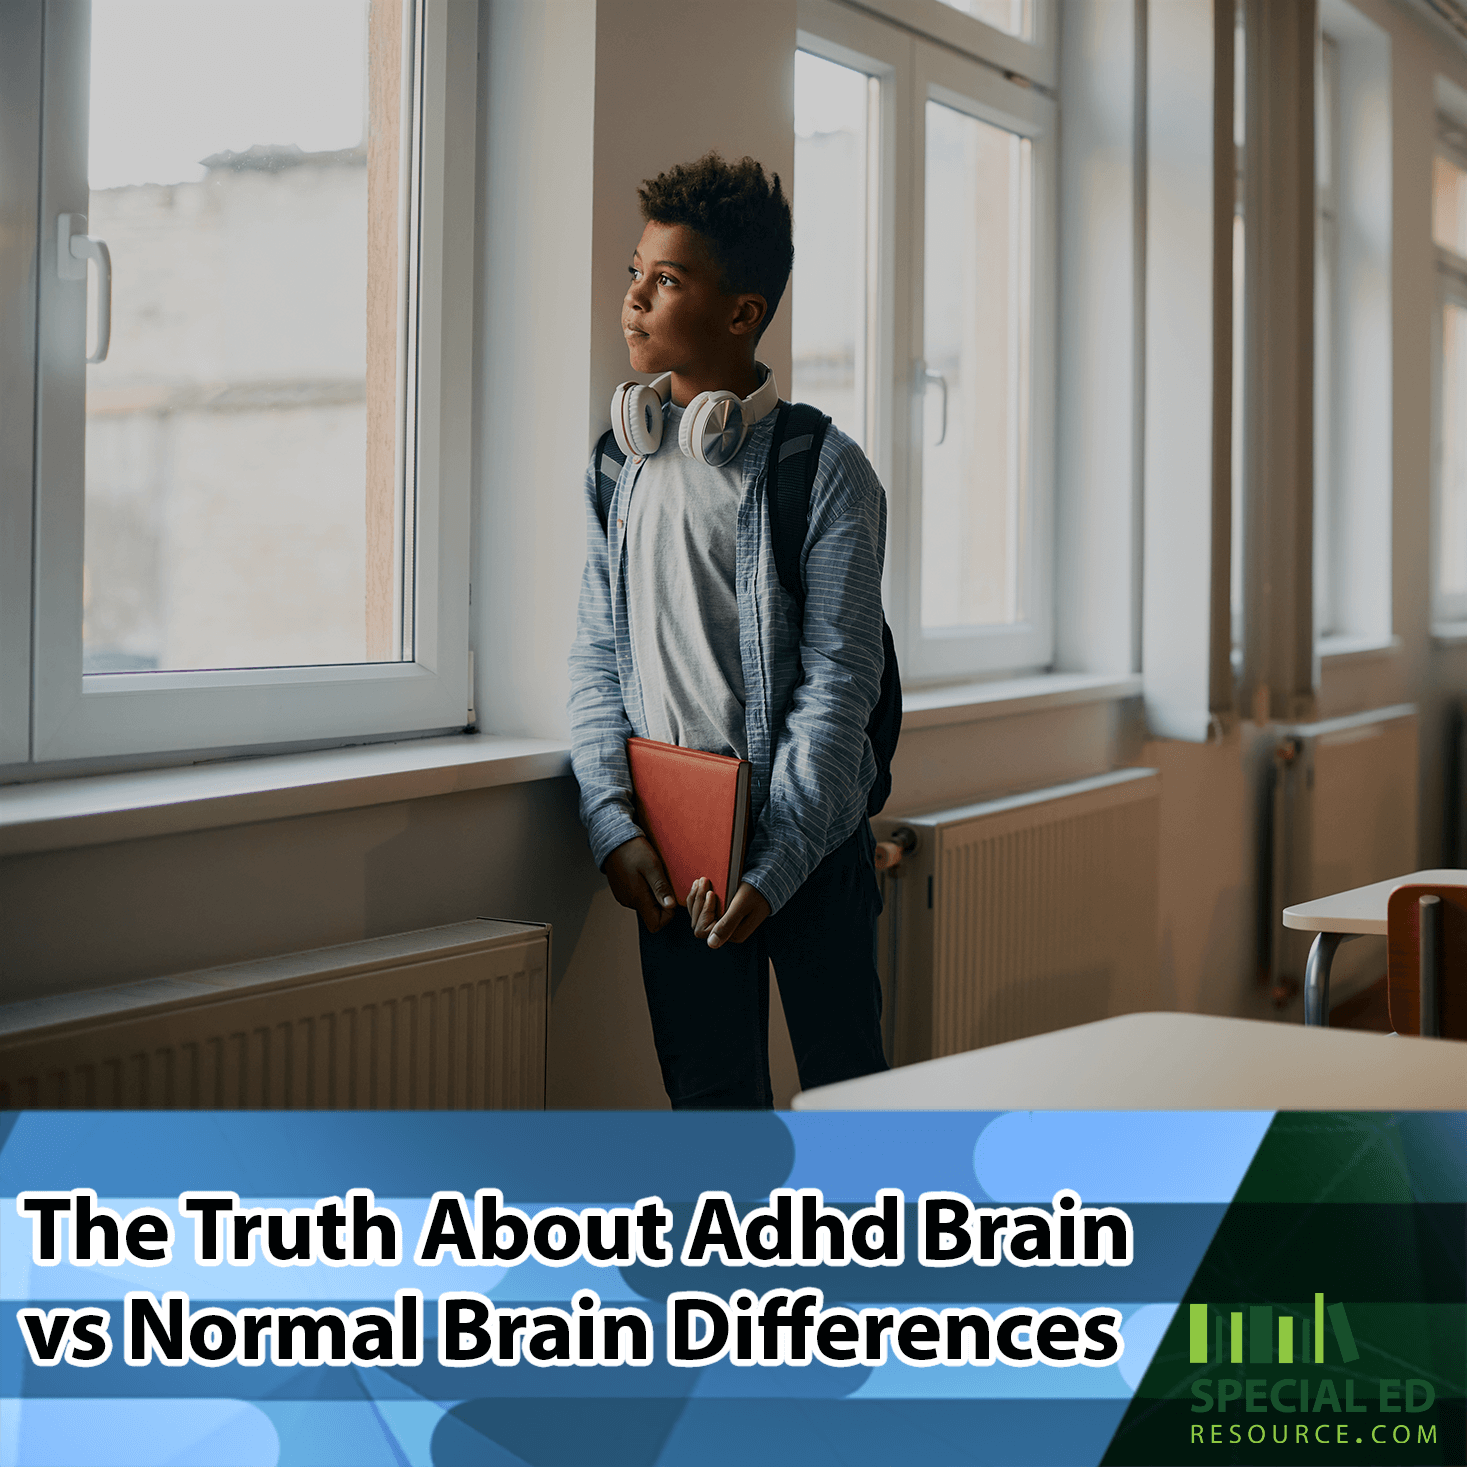 Boy with ADHD standing by the window staring out. What are the differences between the Adhd Brain vs Normal Brain?